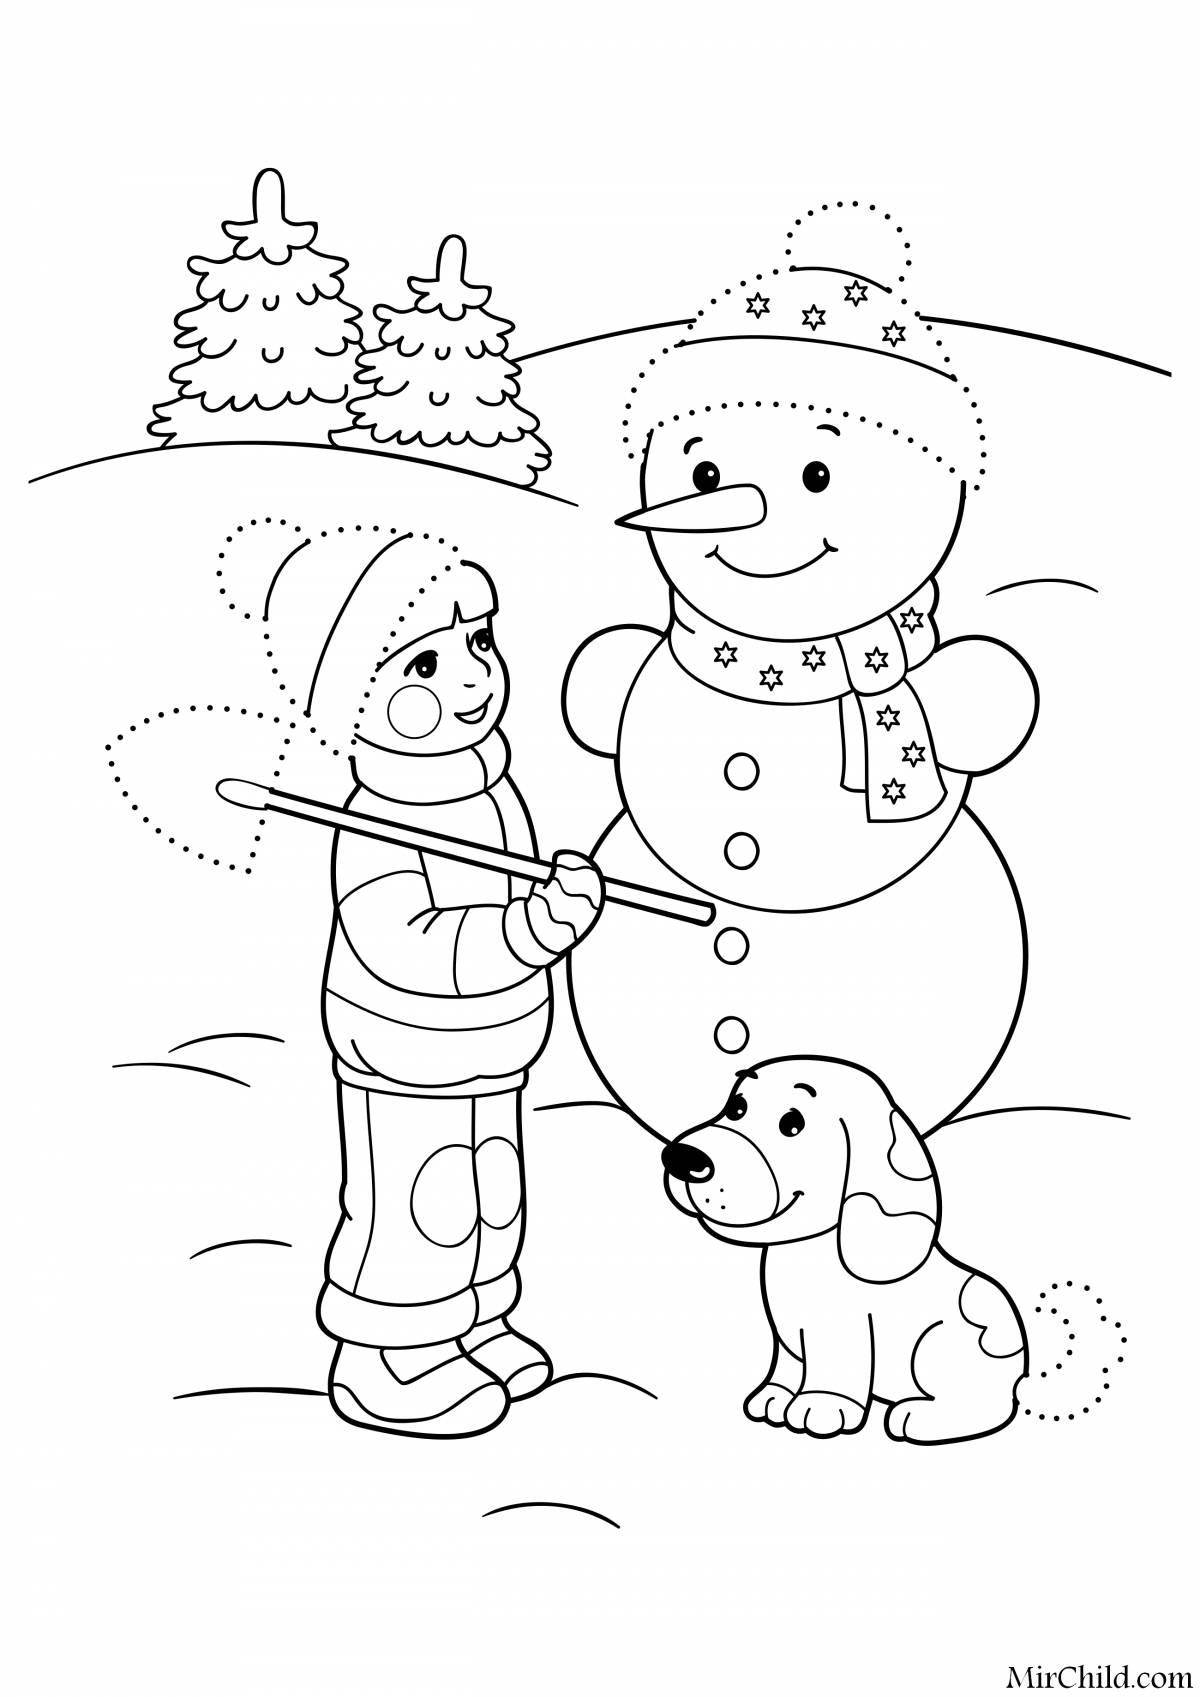 Joyful coloring winter for children 5 years old